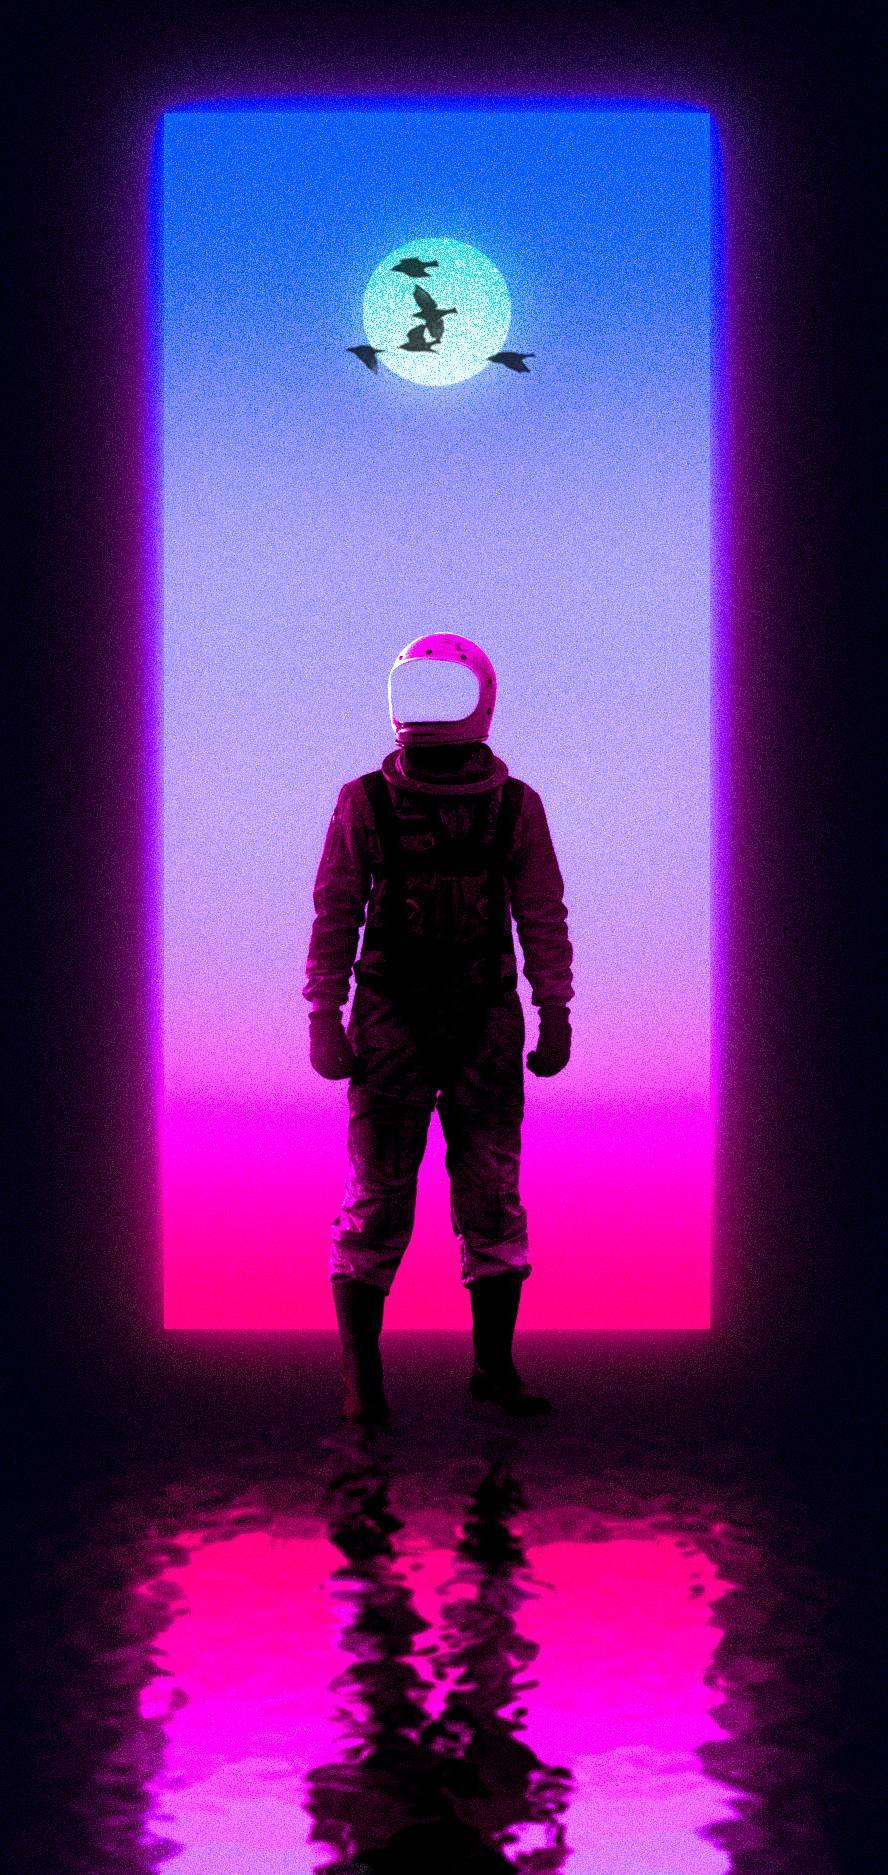 AESTHETIC VAPORWAVE PHONE WALLPAPER COLLECTION 192. Cool